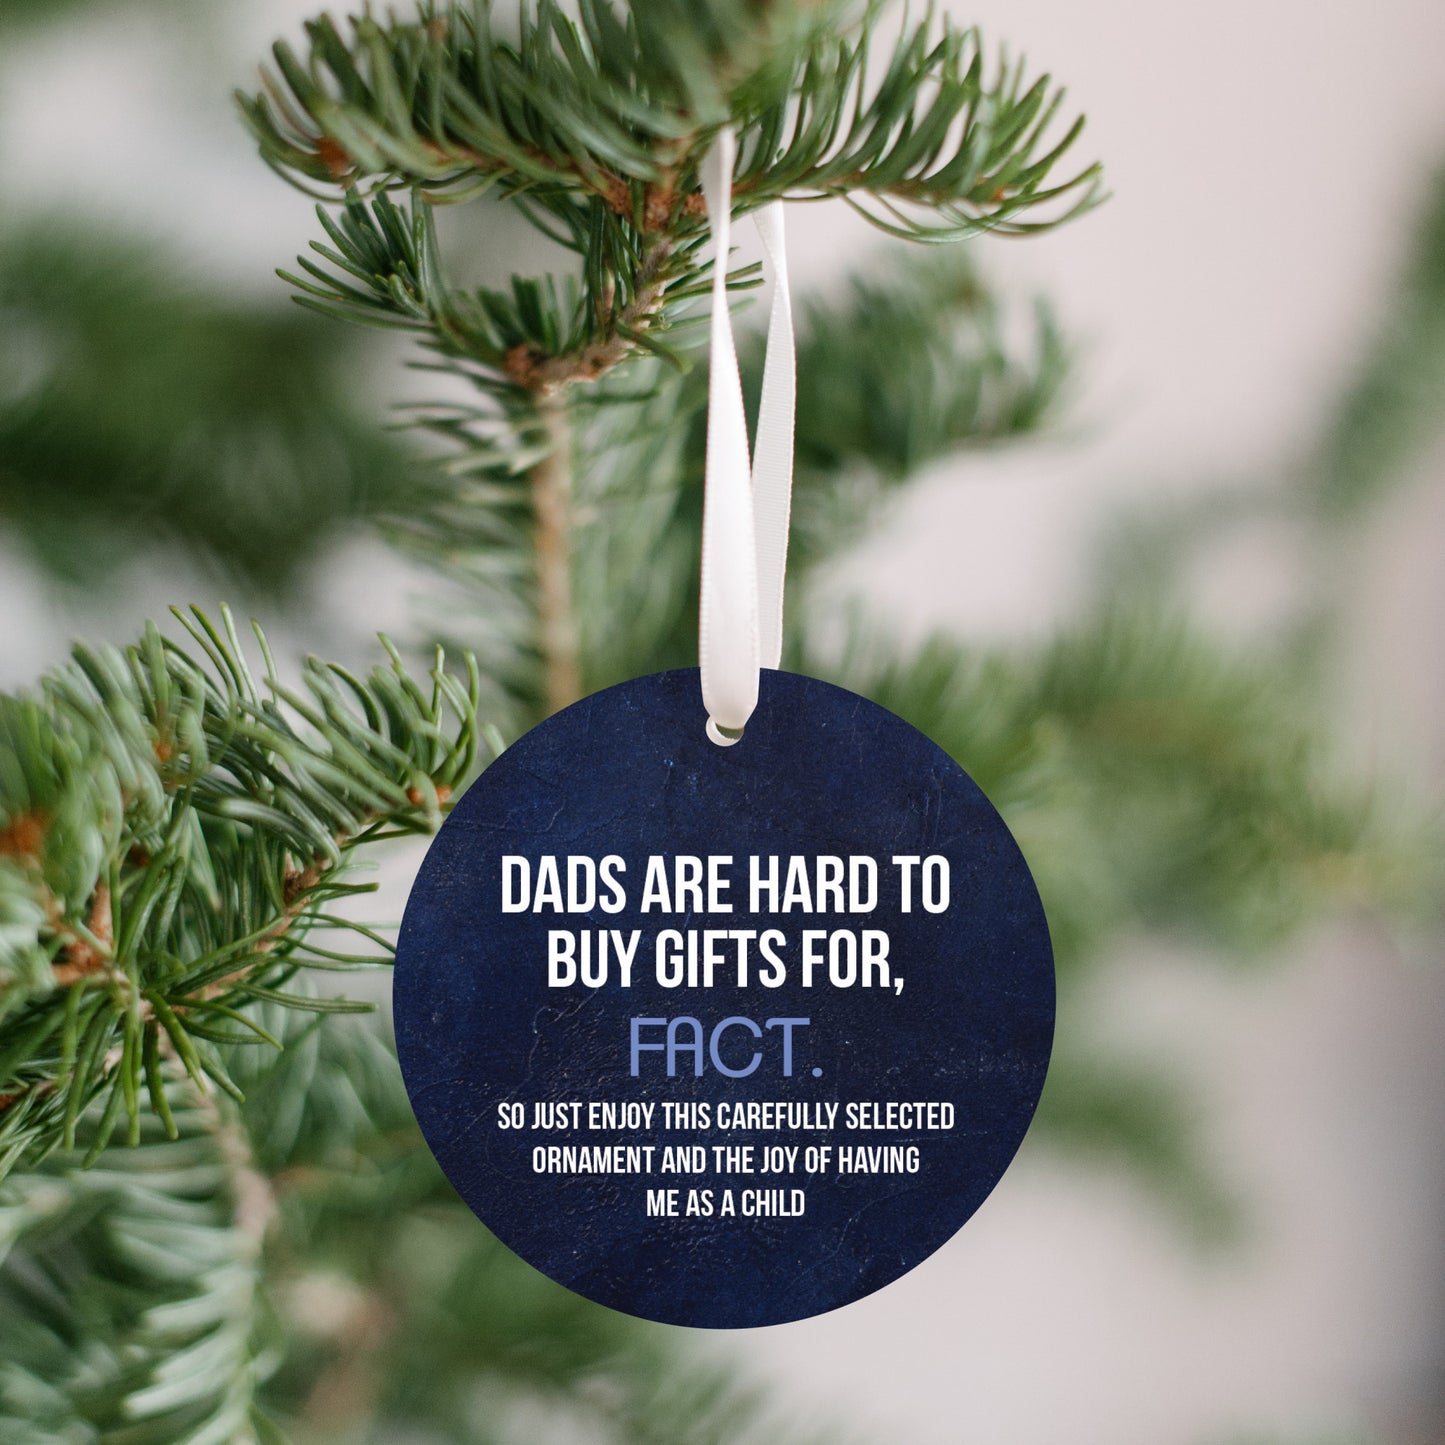 Dads Are Hard To Buy Gifts For - Funny Holiday Ornament Gift